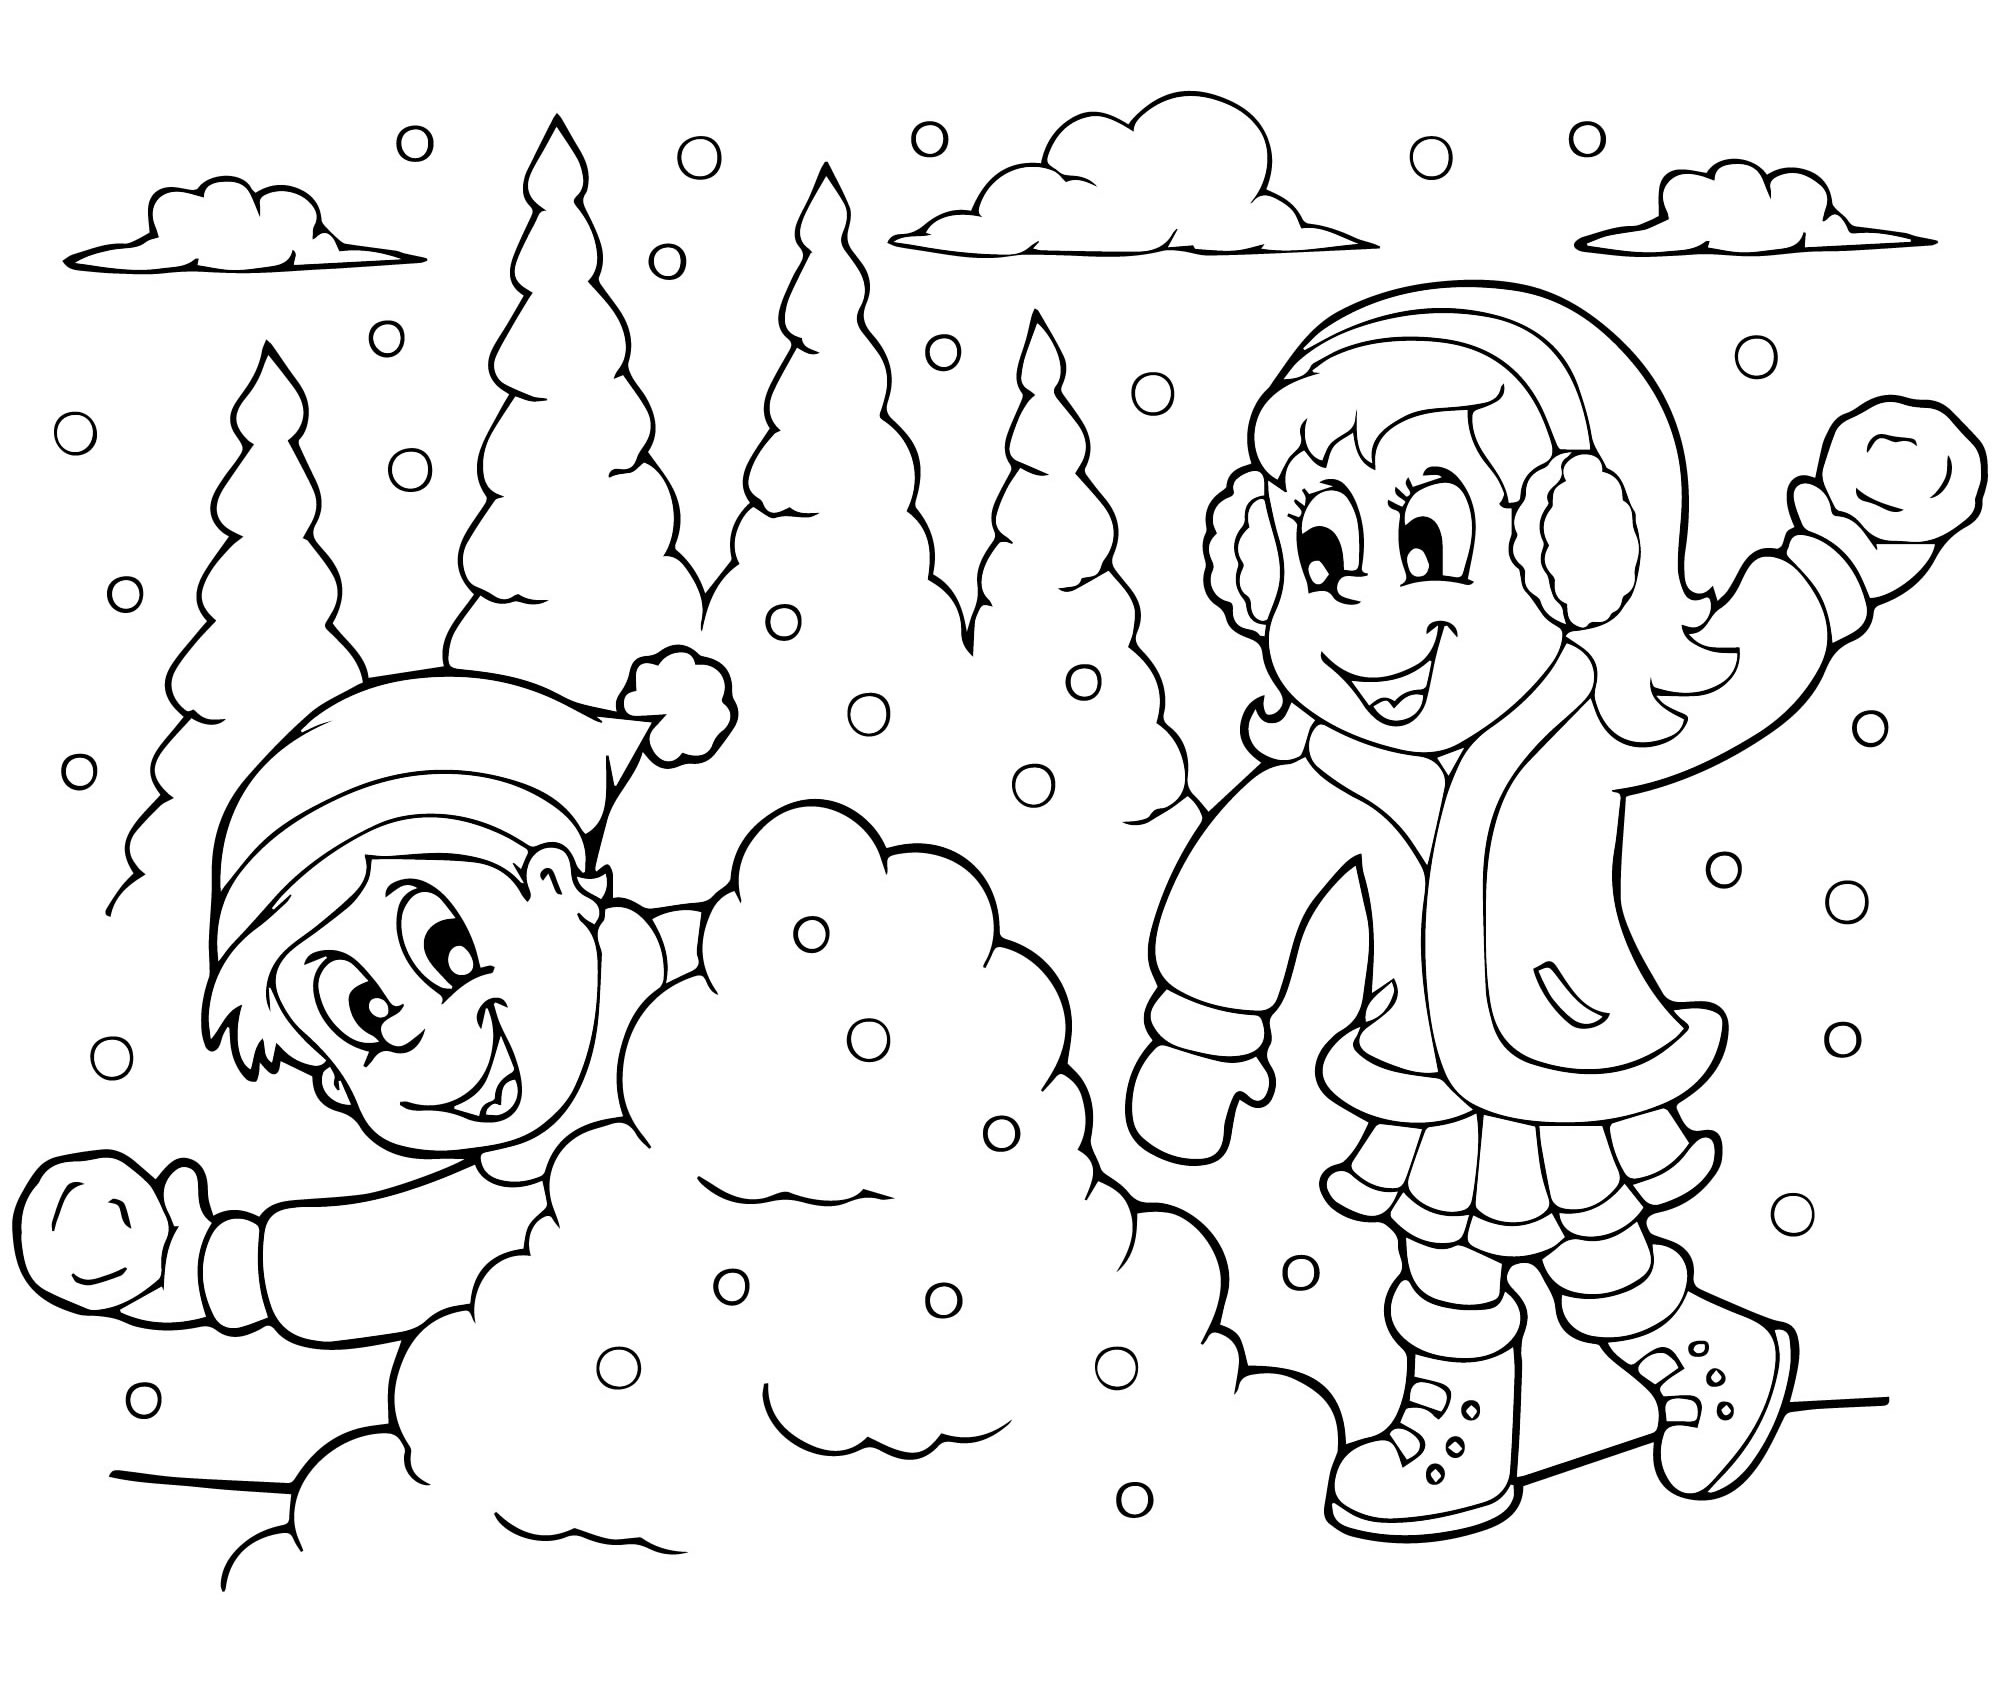 Dazzling winter coloring book for children 5 years old